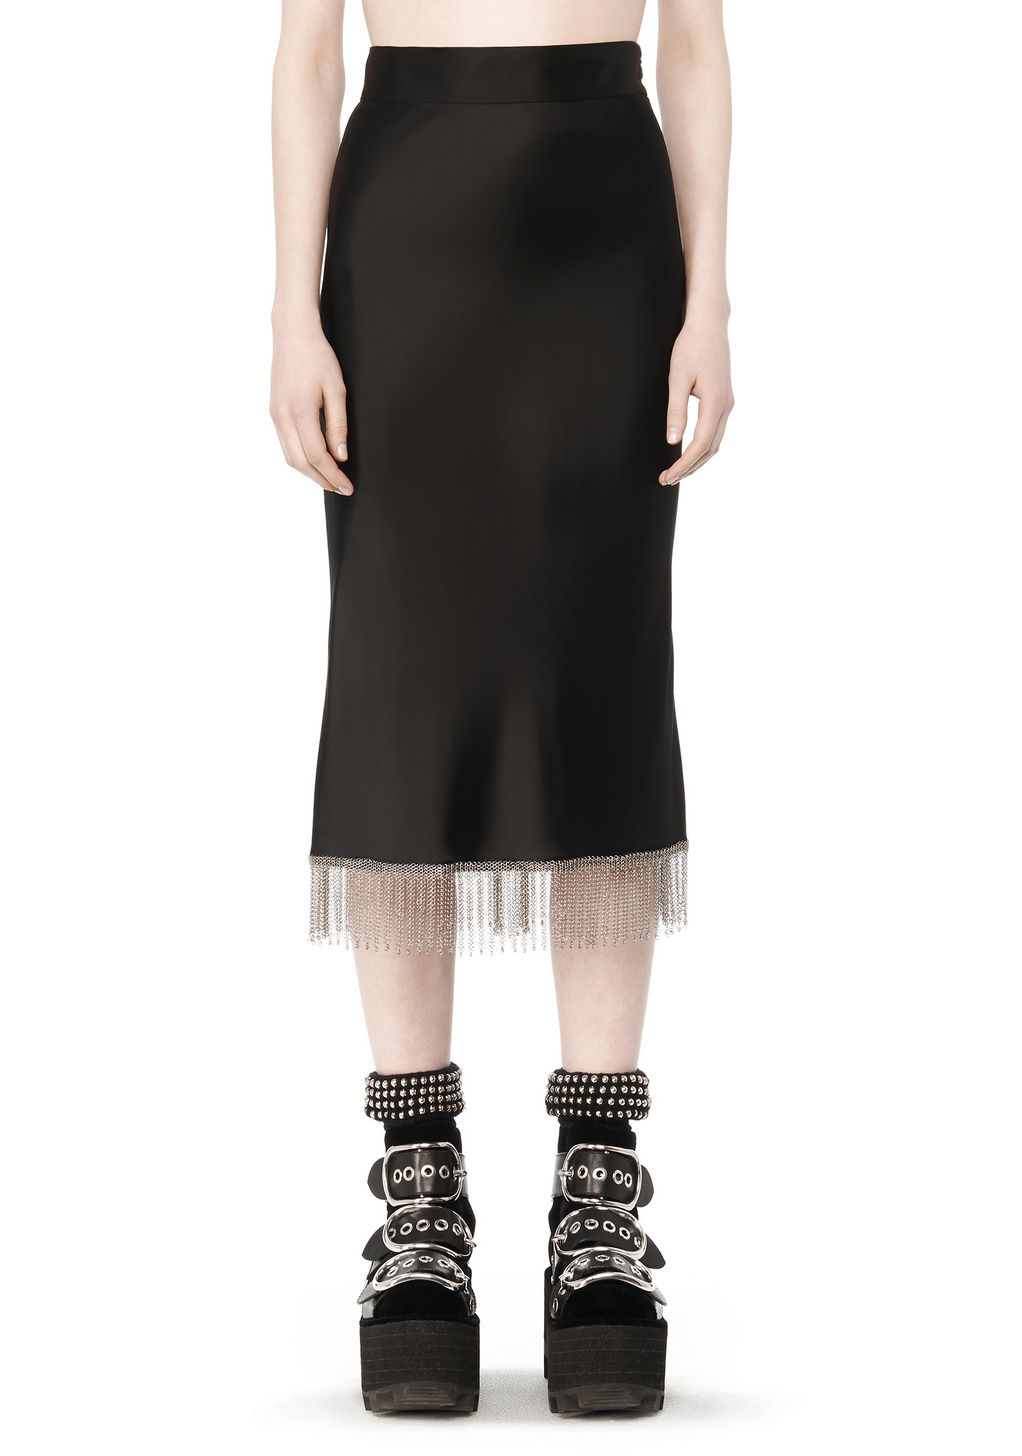 Lyst - Alexander Wang High Waist Skirt With Chainmail Fringe in Black